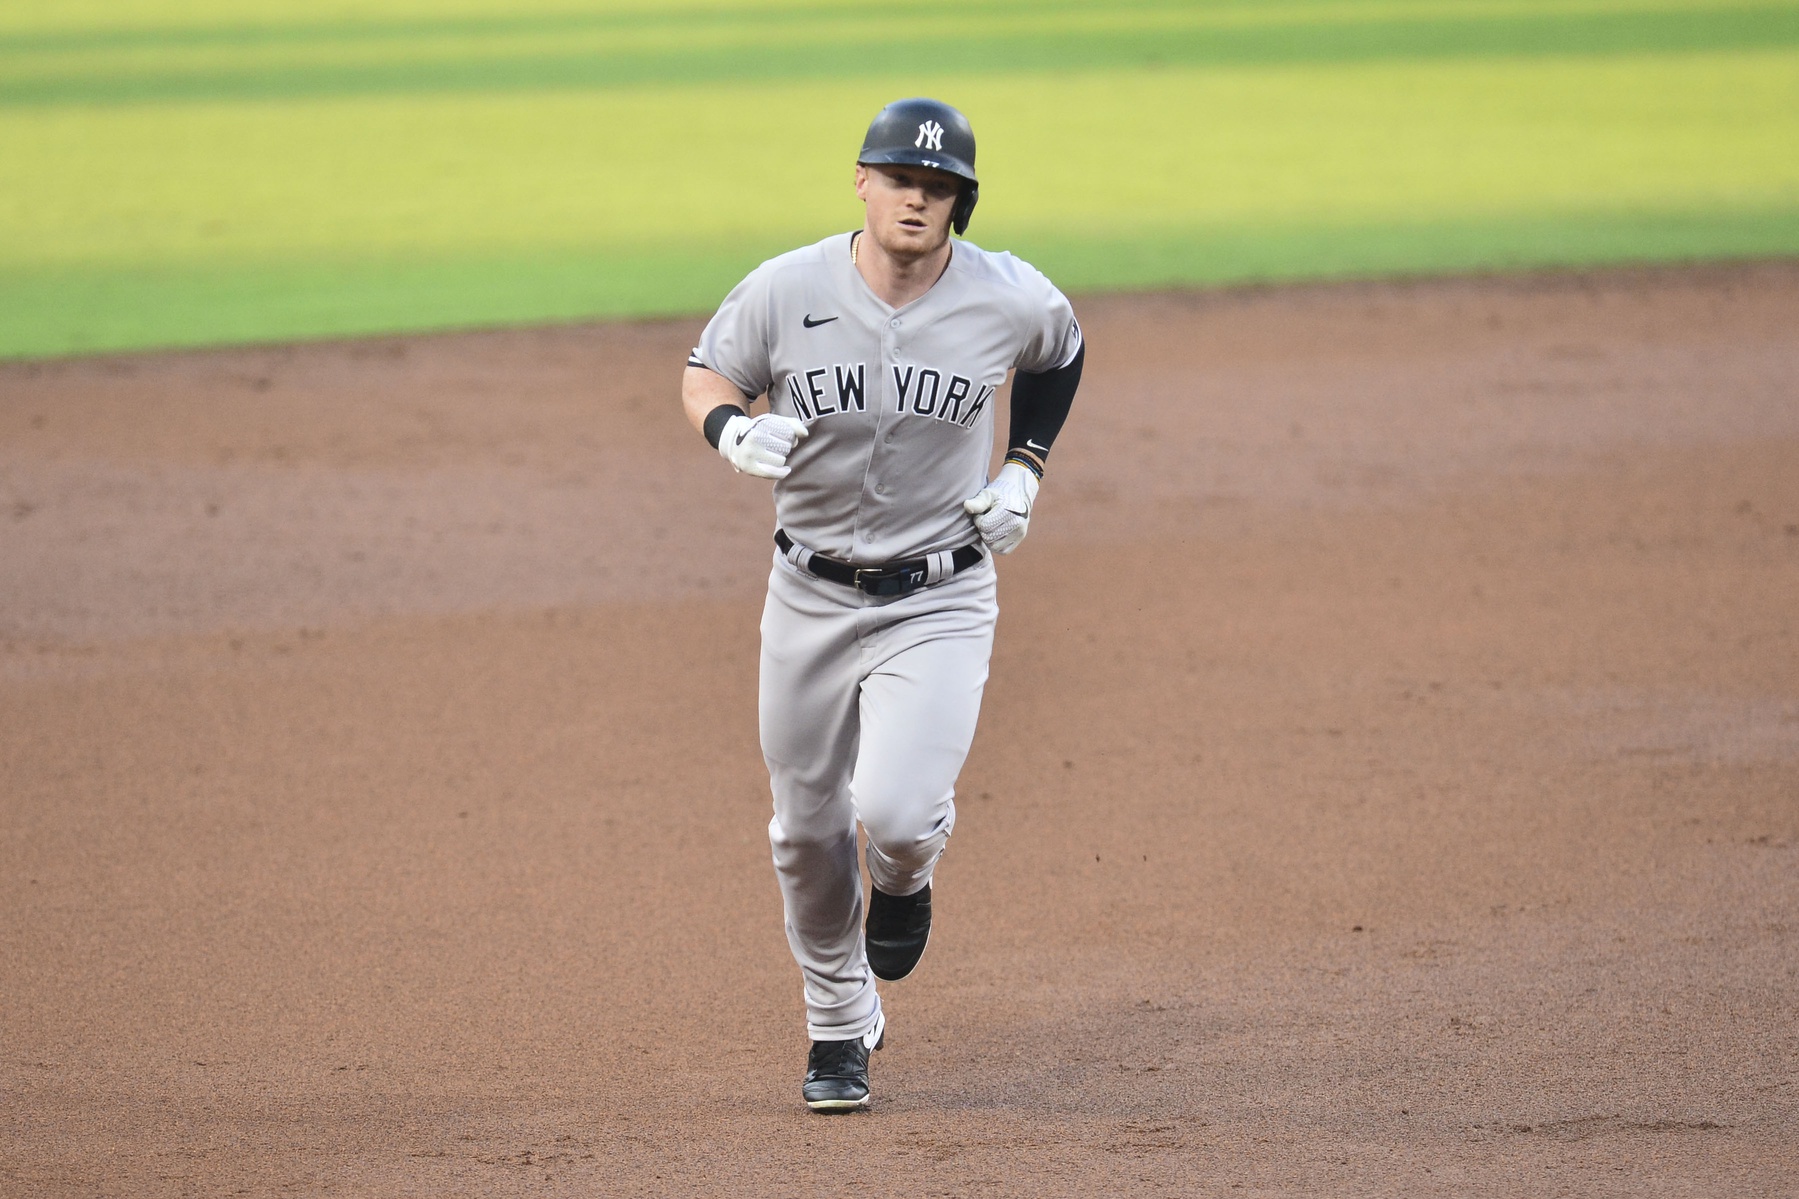 Texas Rangers Sign Former New York Yankees OF Clint Frazier to Minor League Contract